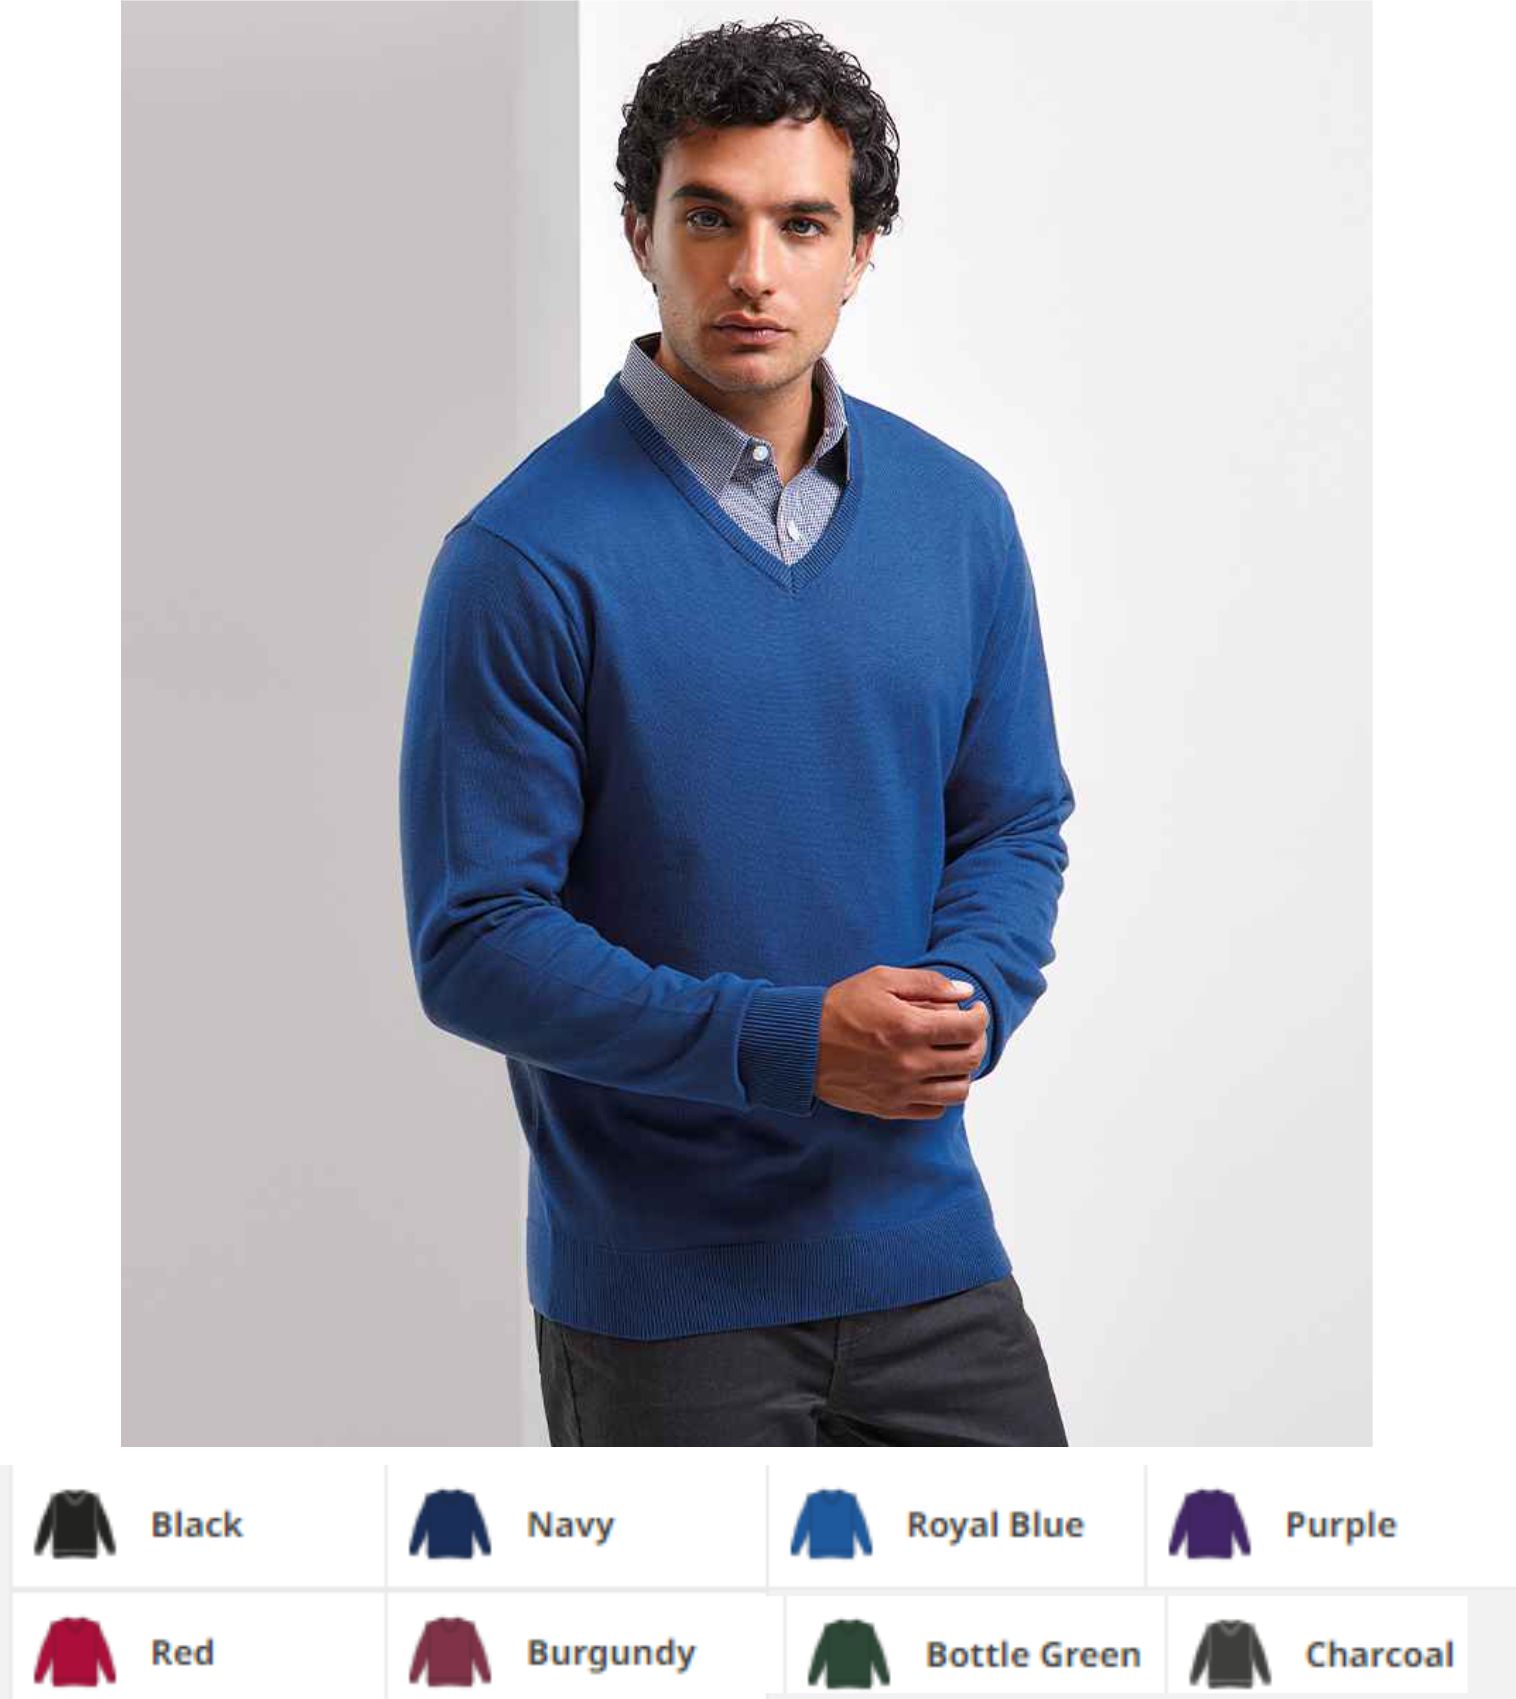 PR694 Premier Knitted Cotton Acrylic V Neck Sweater - Click Image to Close